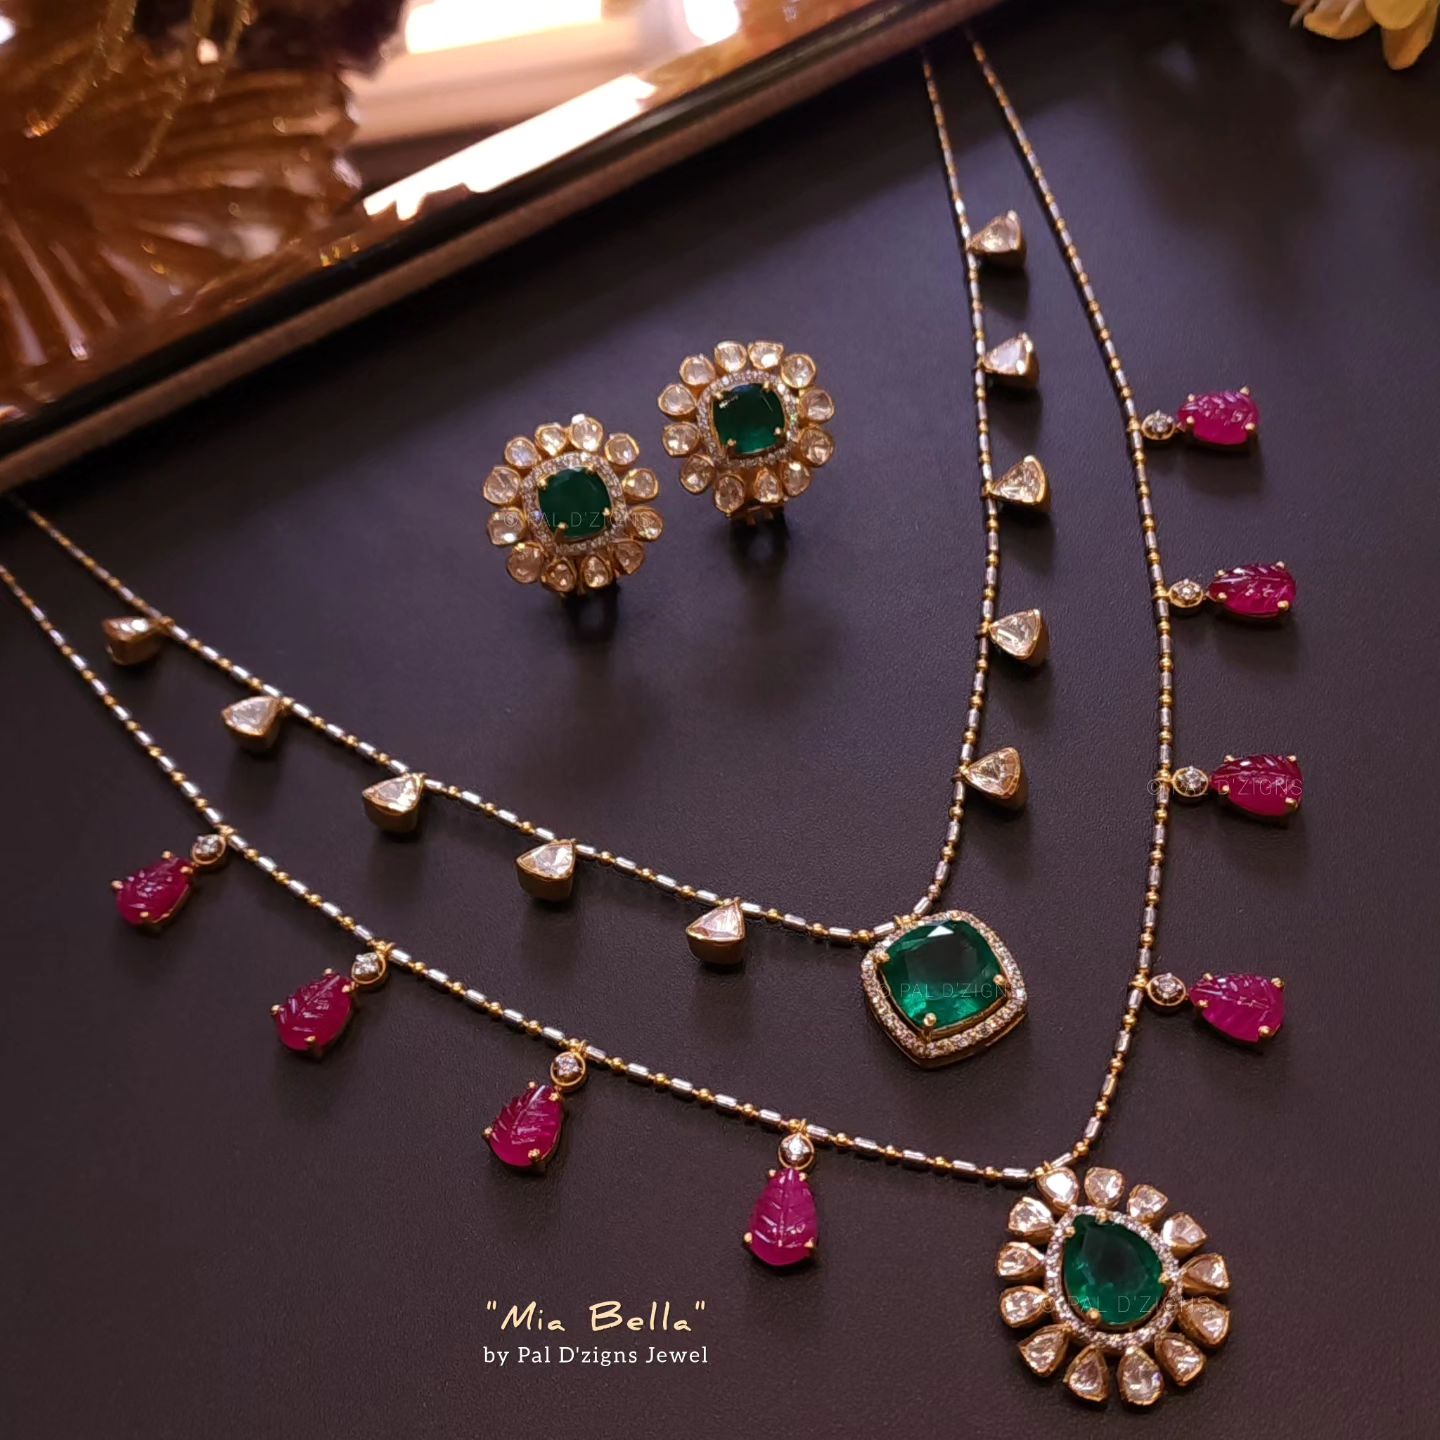 Gold Plated Silver Polki Necklace From 'Paldzigns Jewel'